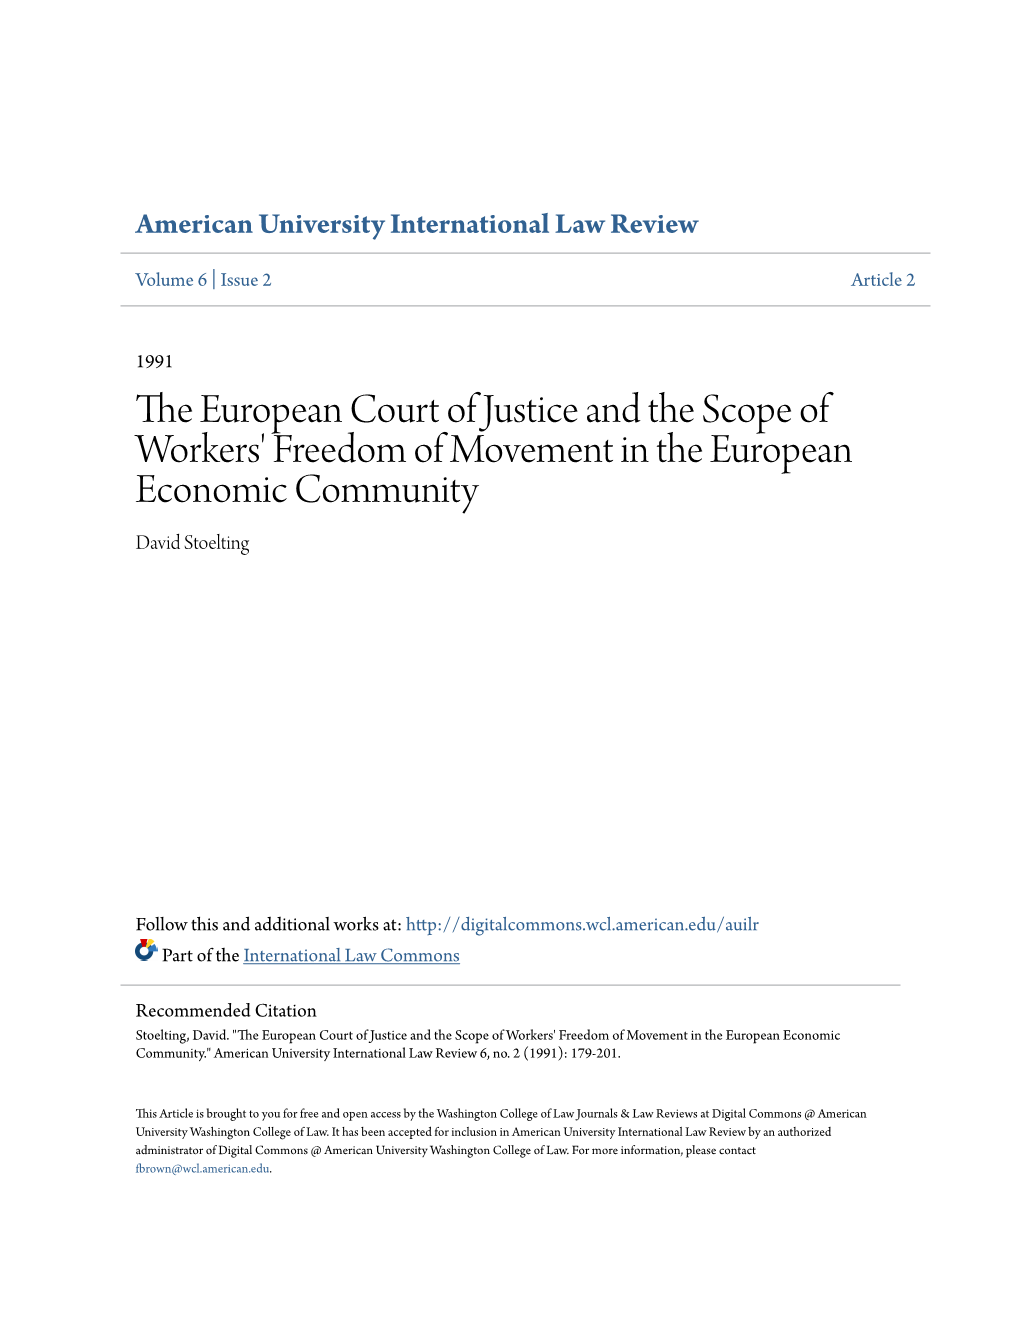 The European Court of Justice and the Scope of Workers' Freedom of Movement in the European Economic Community